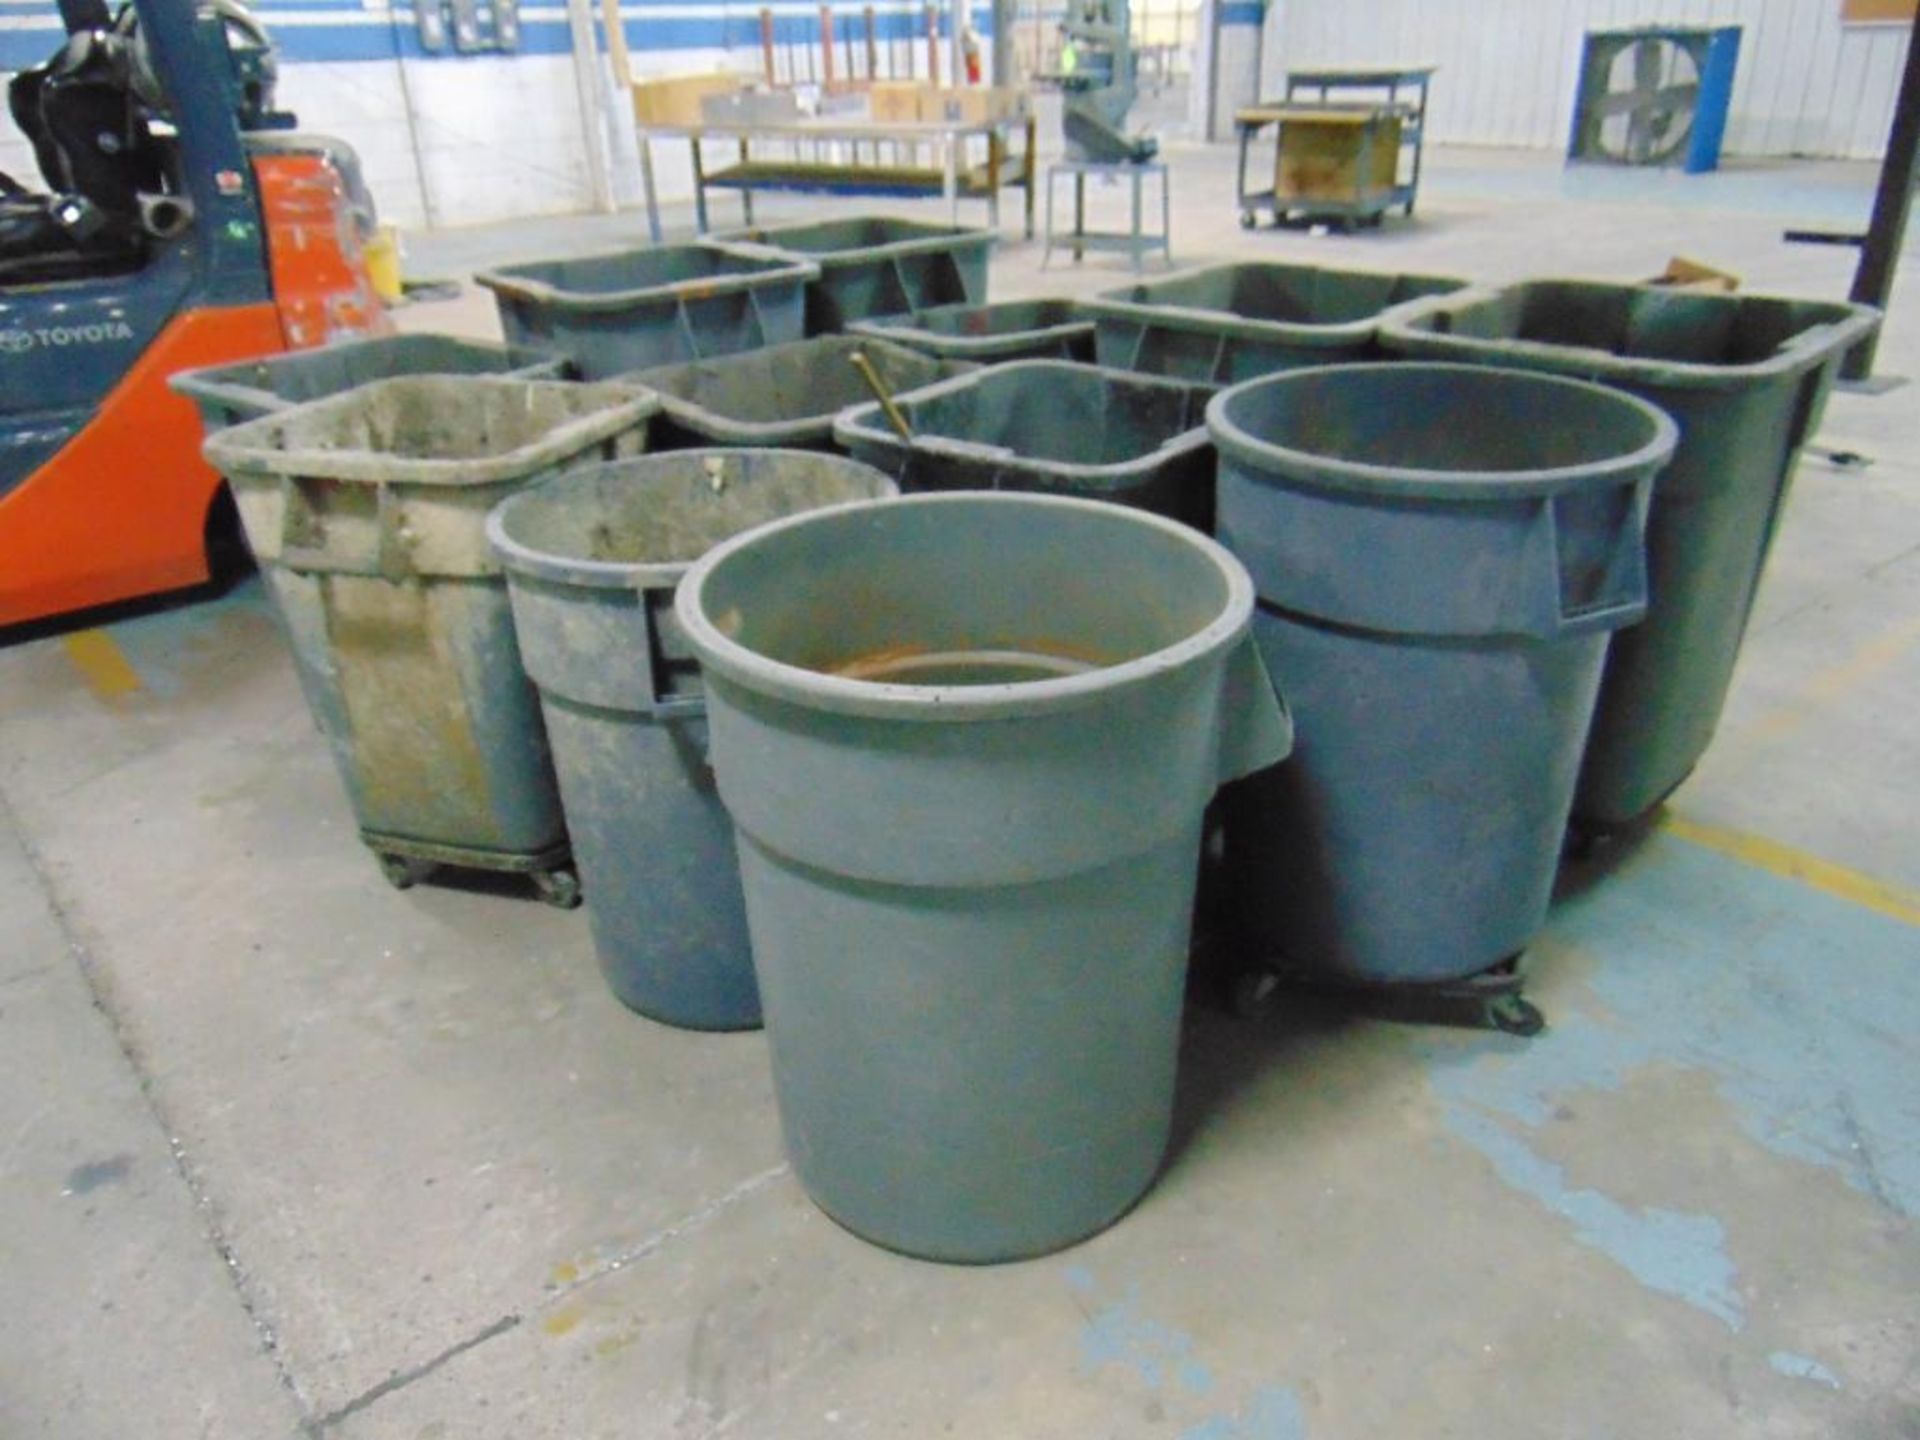 Lot of Trash Cans - Image 2 of 4